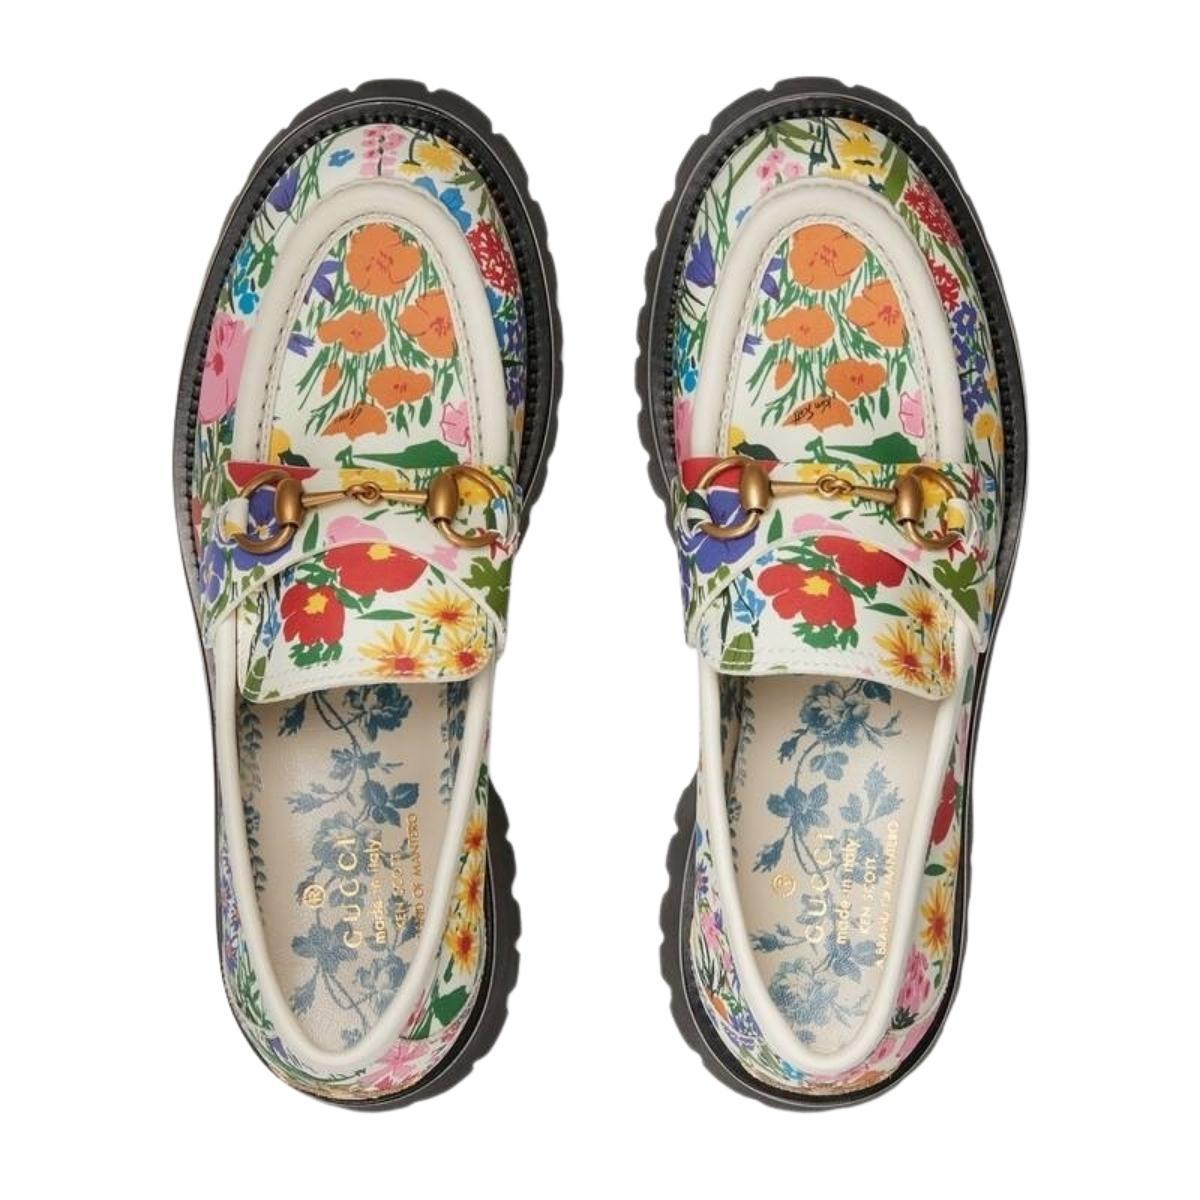 White leather with floral print by ken scott
Signature Horsebit detail
Embroidered bee detail
Branded insole
Rubber lug sole
Composition: Leather 100%
Lining: Leather 100%
Sole: Rubber 100%
Height: 1.5